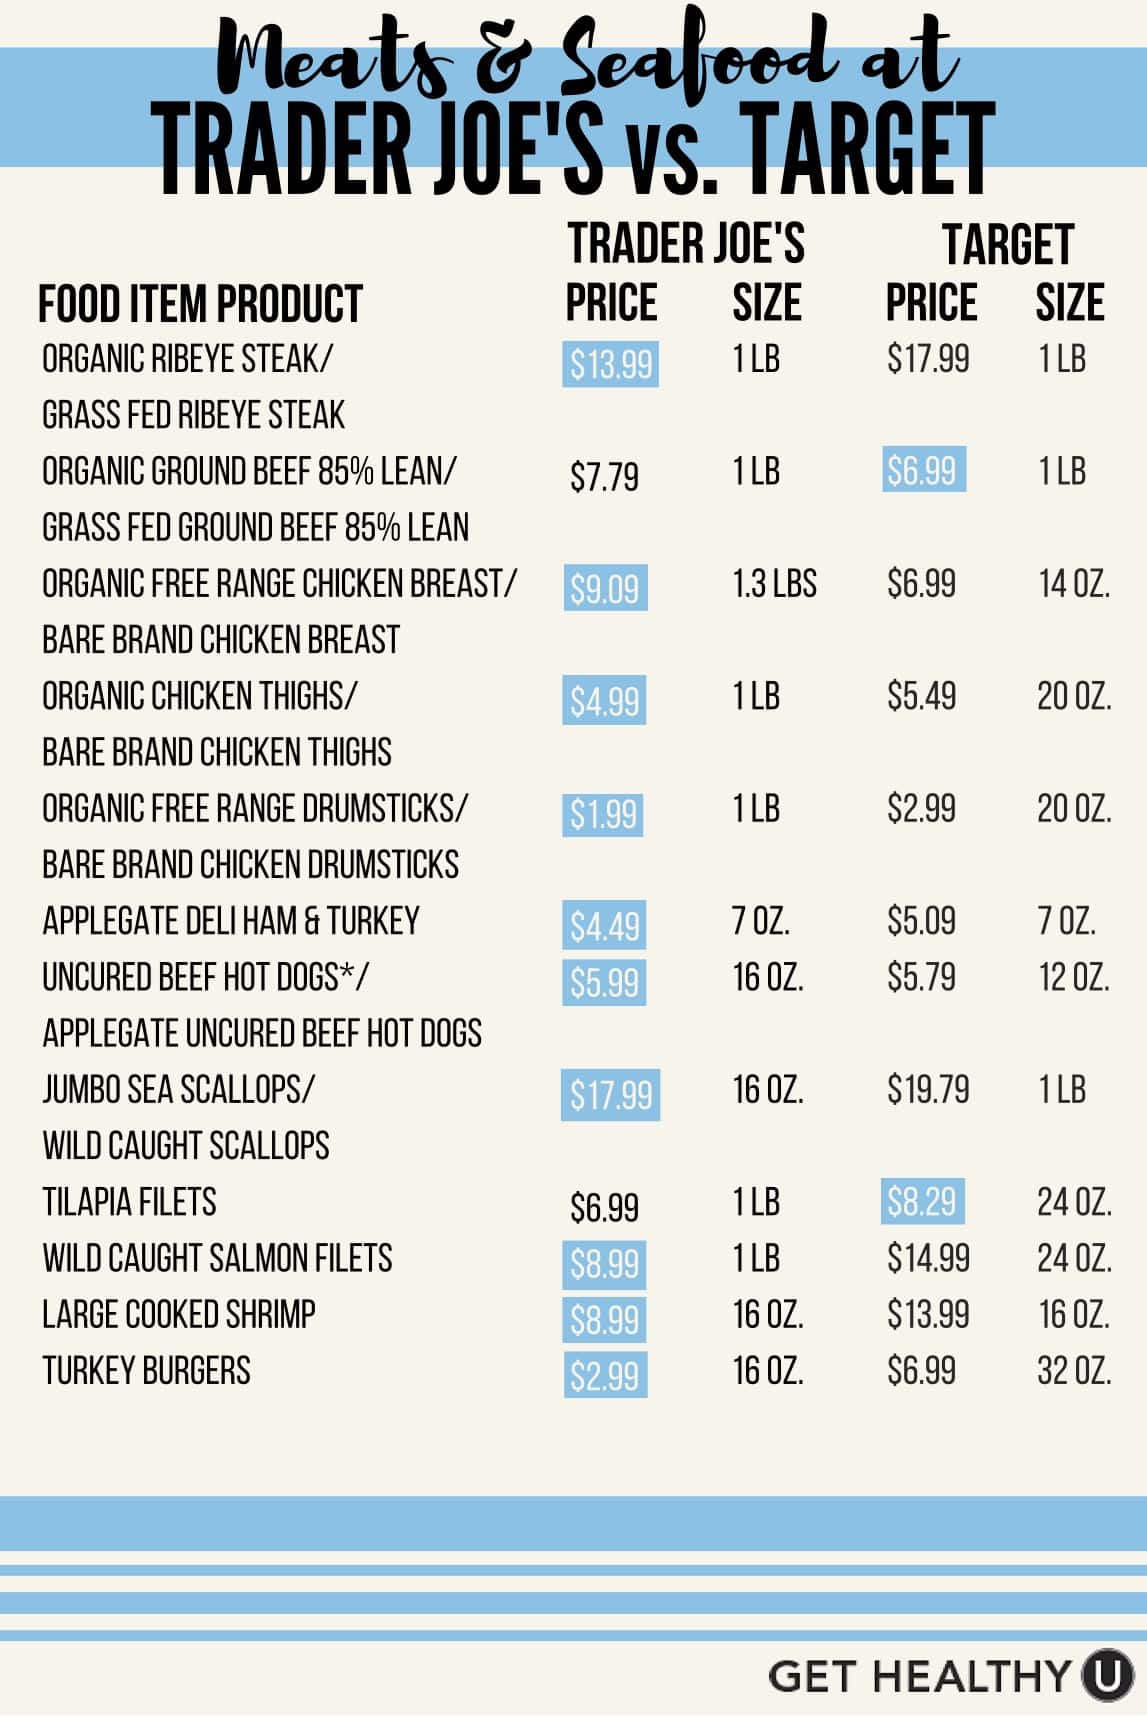 Trader Joe's vs. Target - both offer healthy options, but which one wins out on price? And what are the best things to buy at each place?